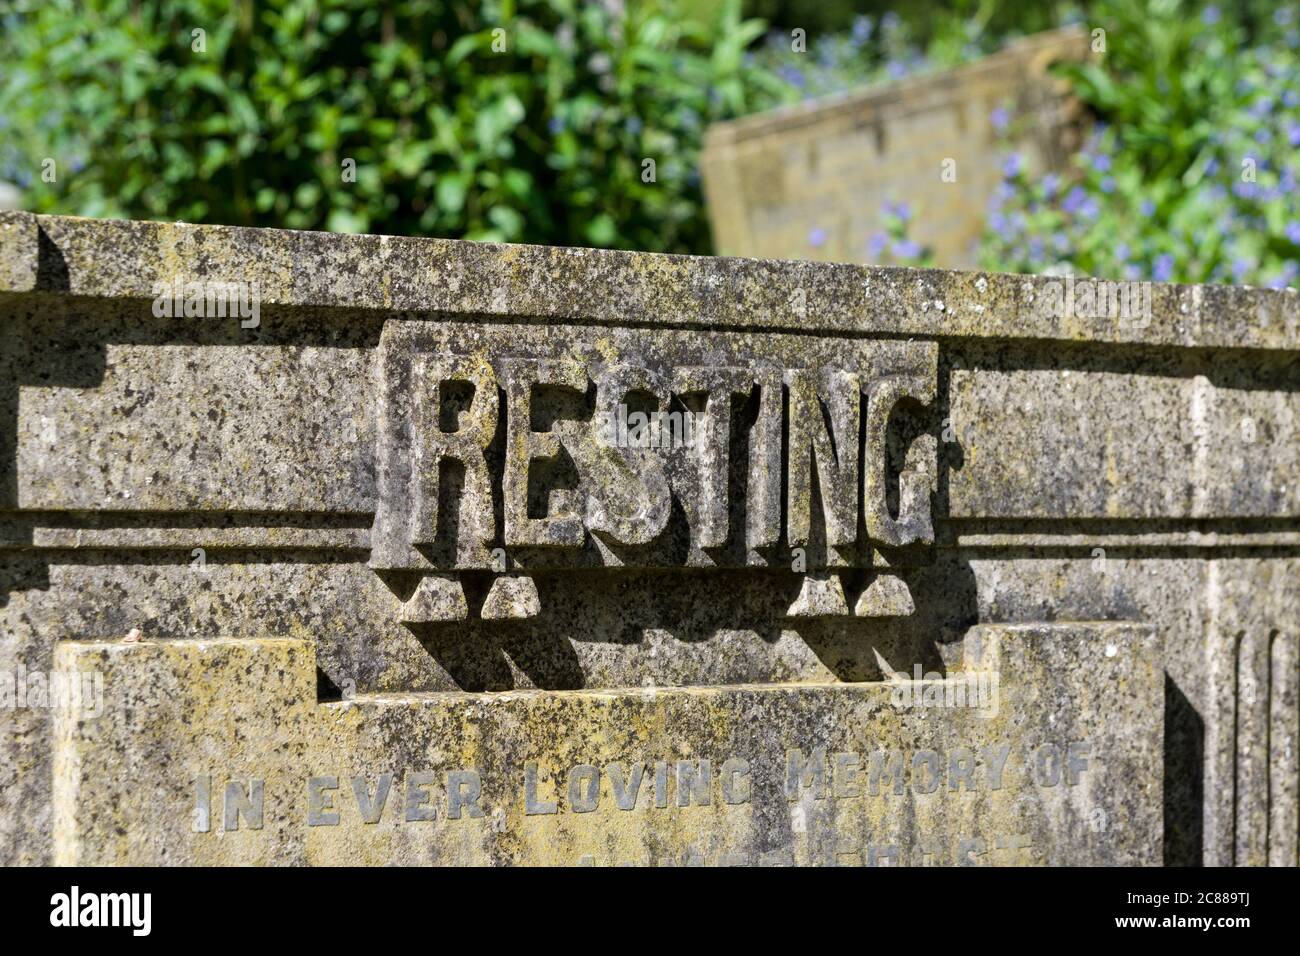 The word 'Resting' carved in stone on top of a gravestone in a UK country churchyard. Stock Photo